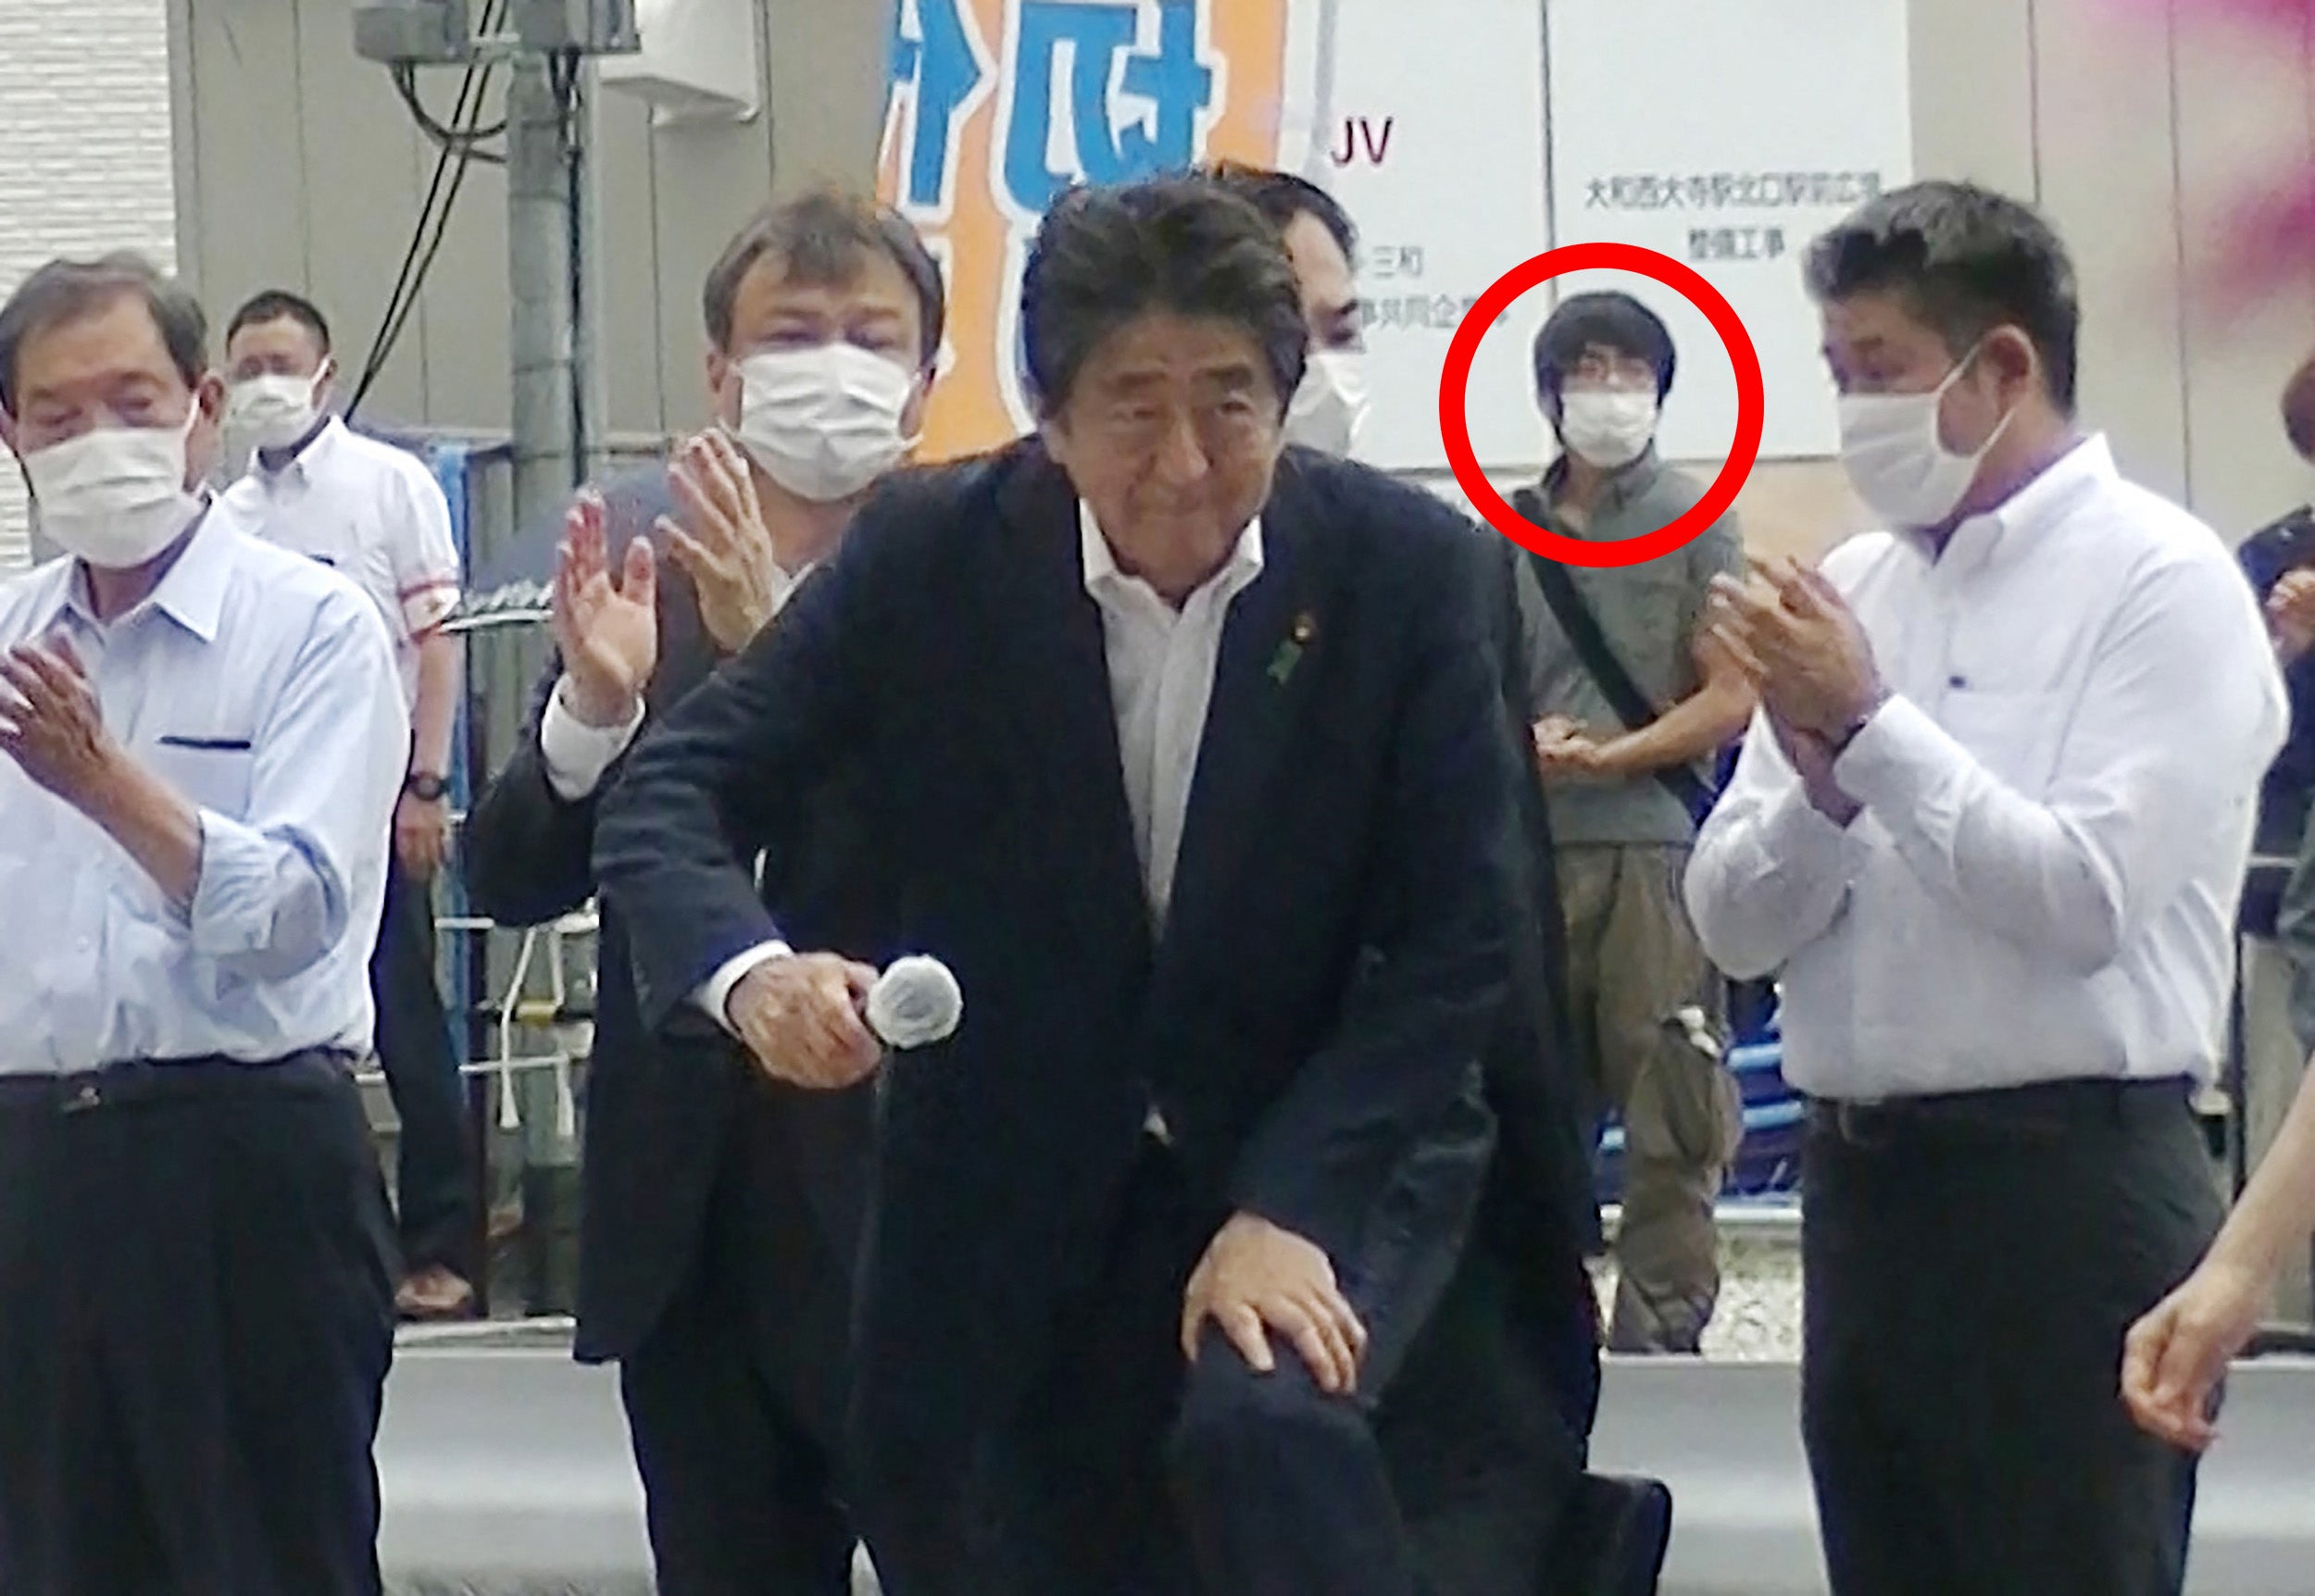 Shinzo attending an election campaign before giving a speech at Kintetsu Yamato-Saidaiji station square in Nara, while a man suspected of shooting Abe shortly after stands in the background